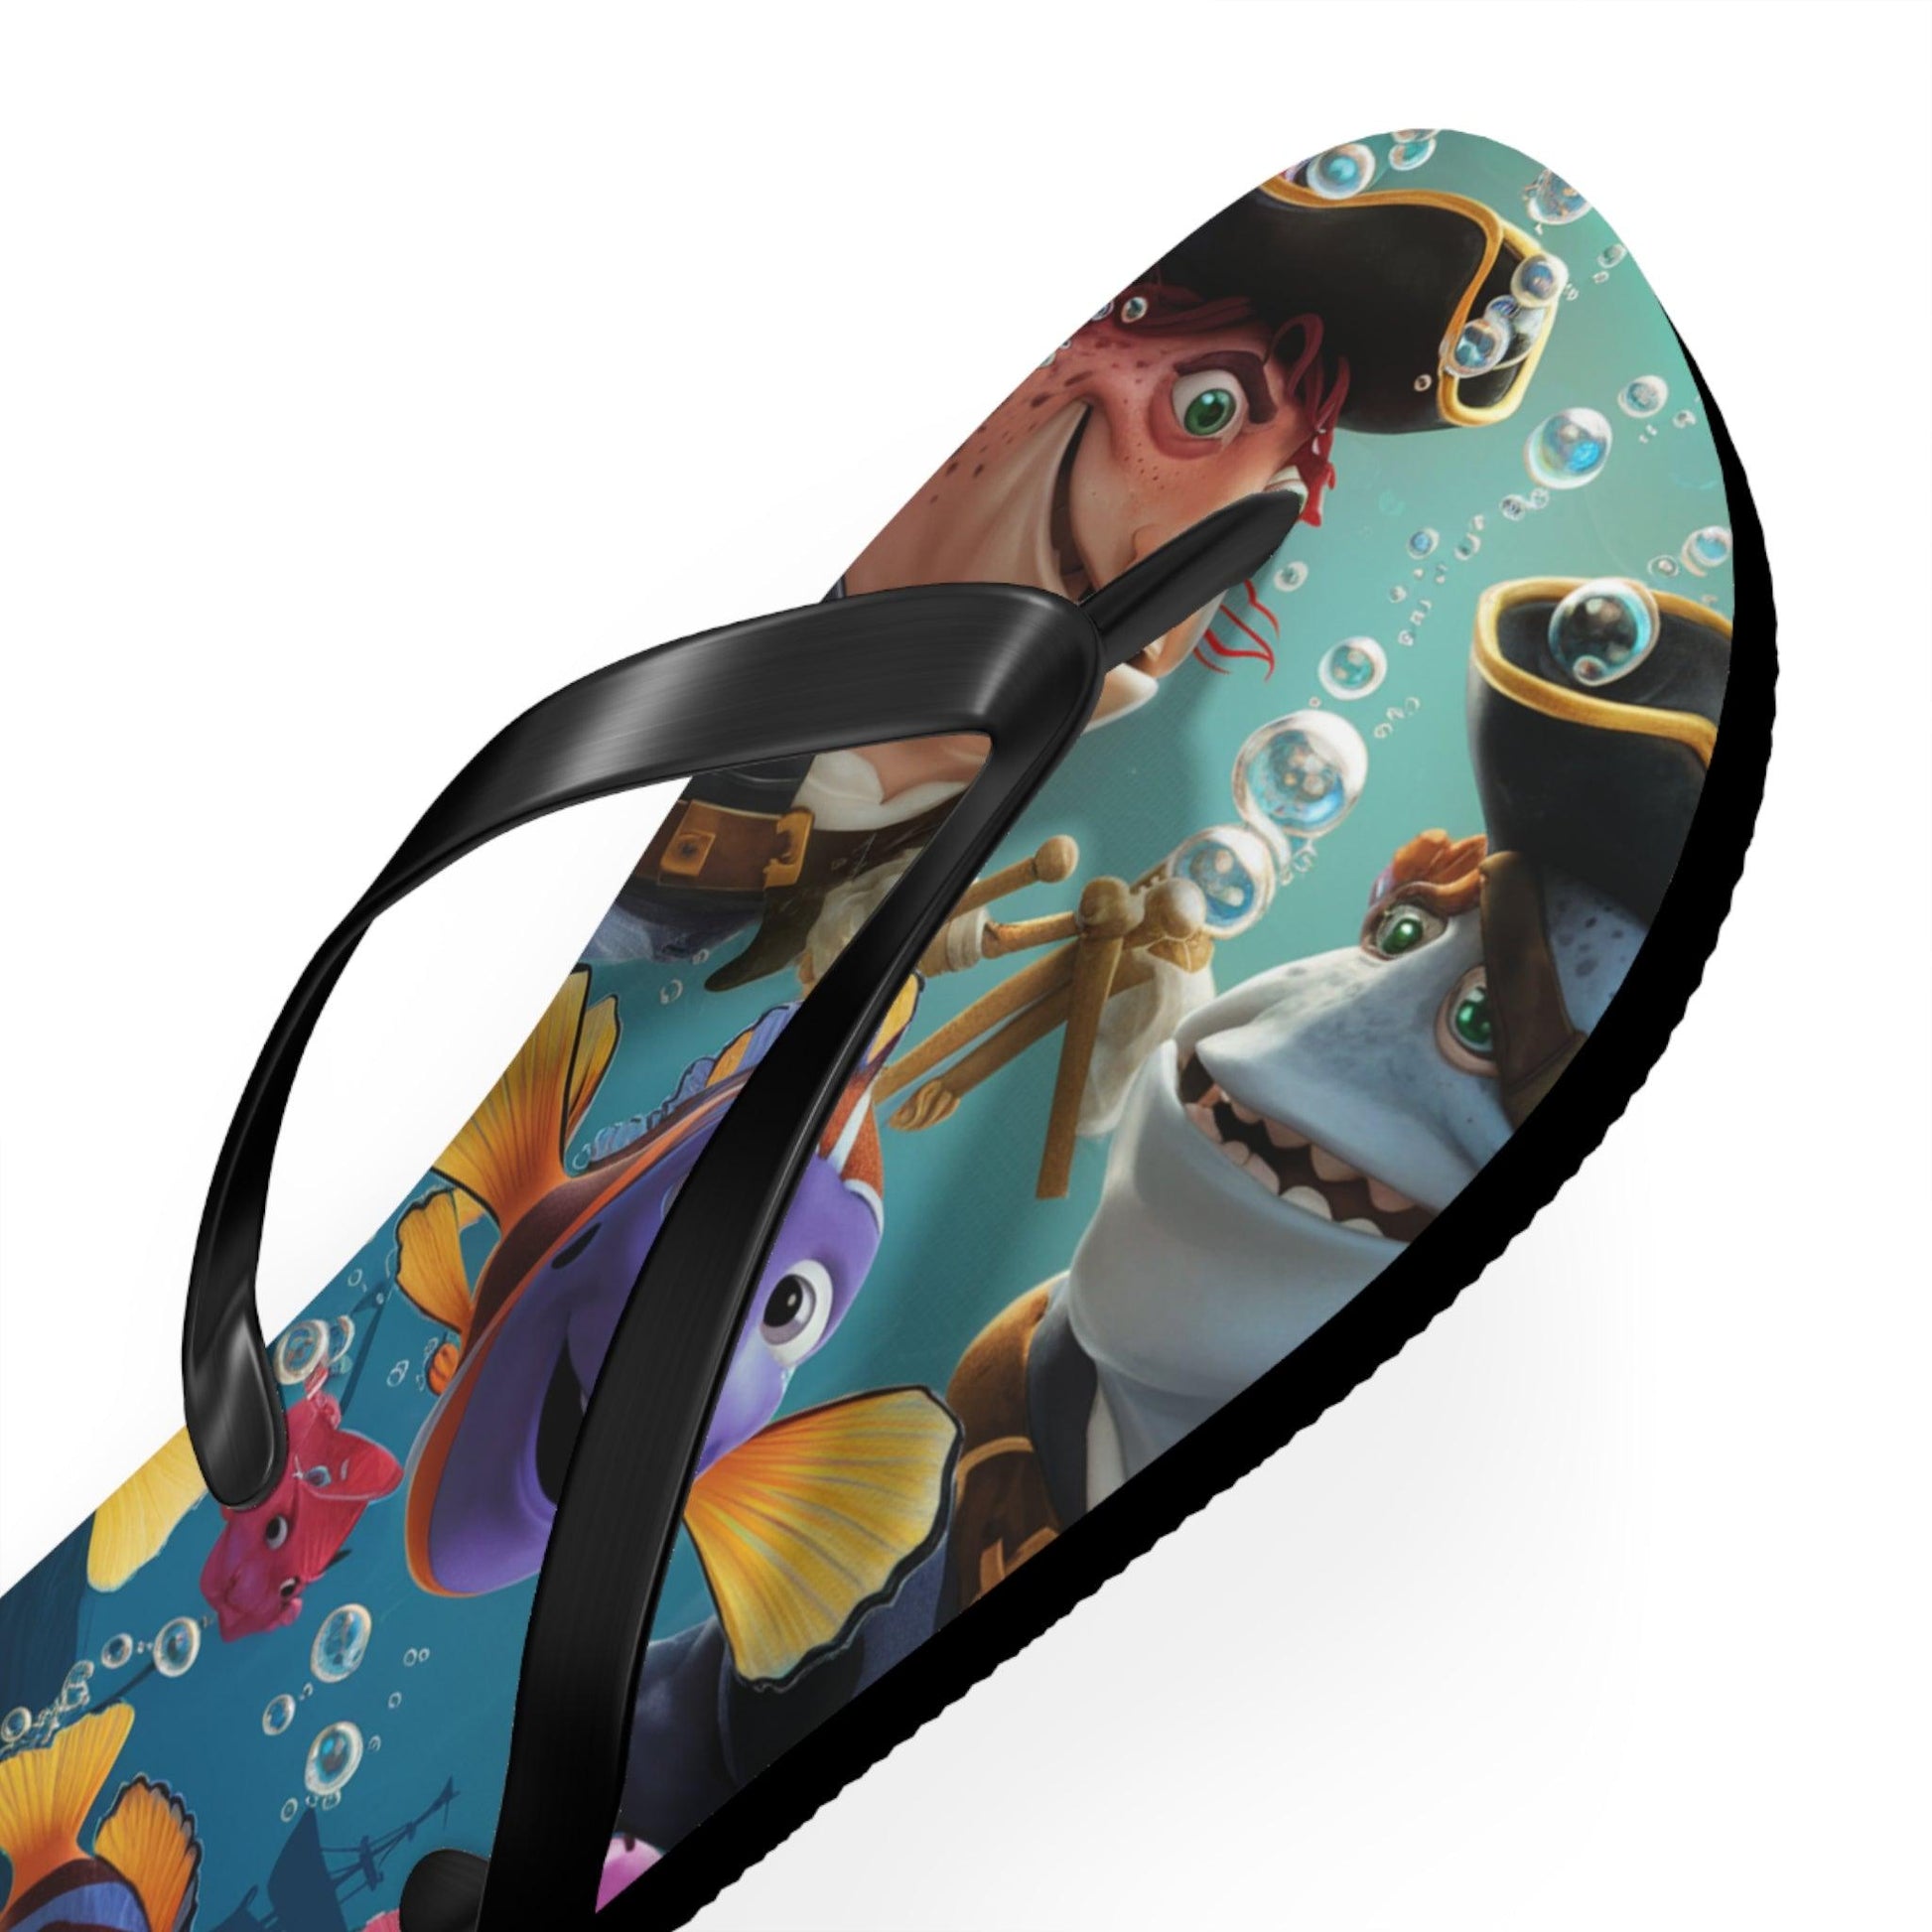 Comical Fish and Pirates Inspired Flip Flops, Express Your Beach Loving Self - Coastal Collections